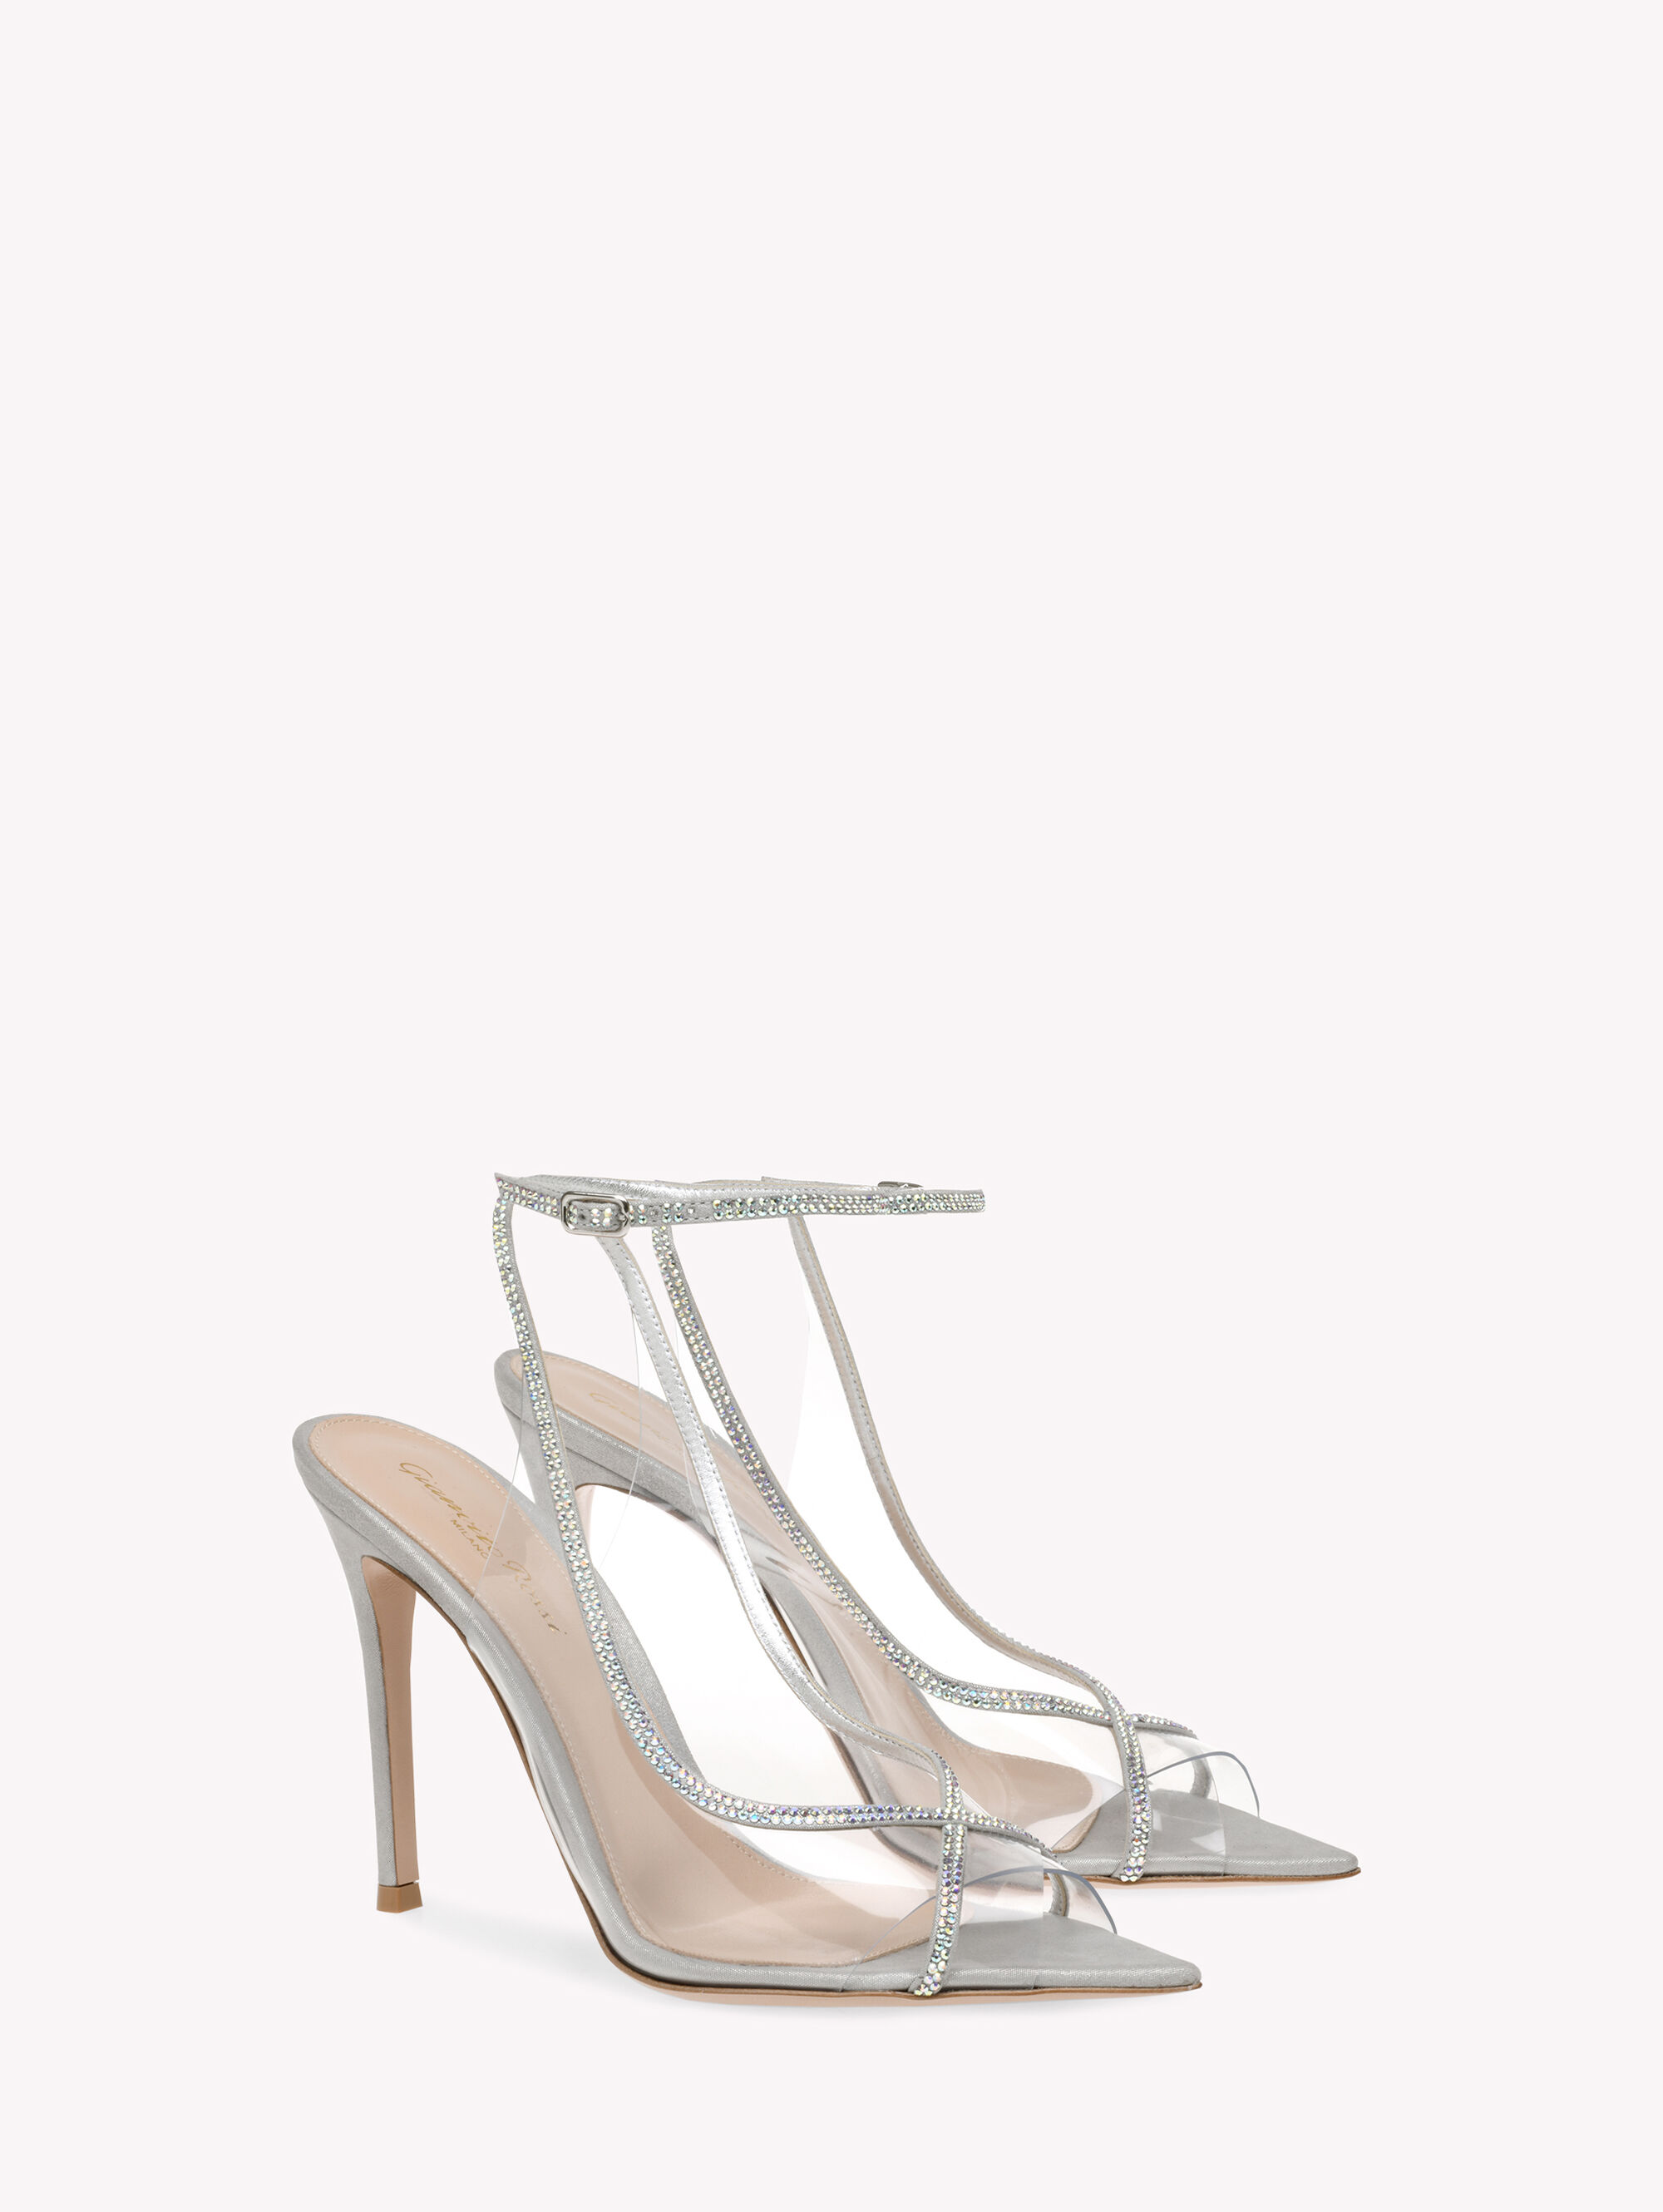 Sandals CRYSTELLE| Gianvito Rossi